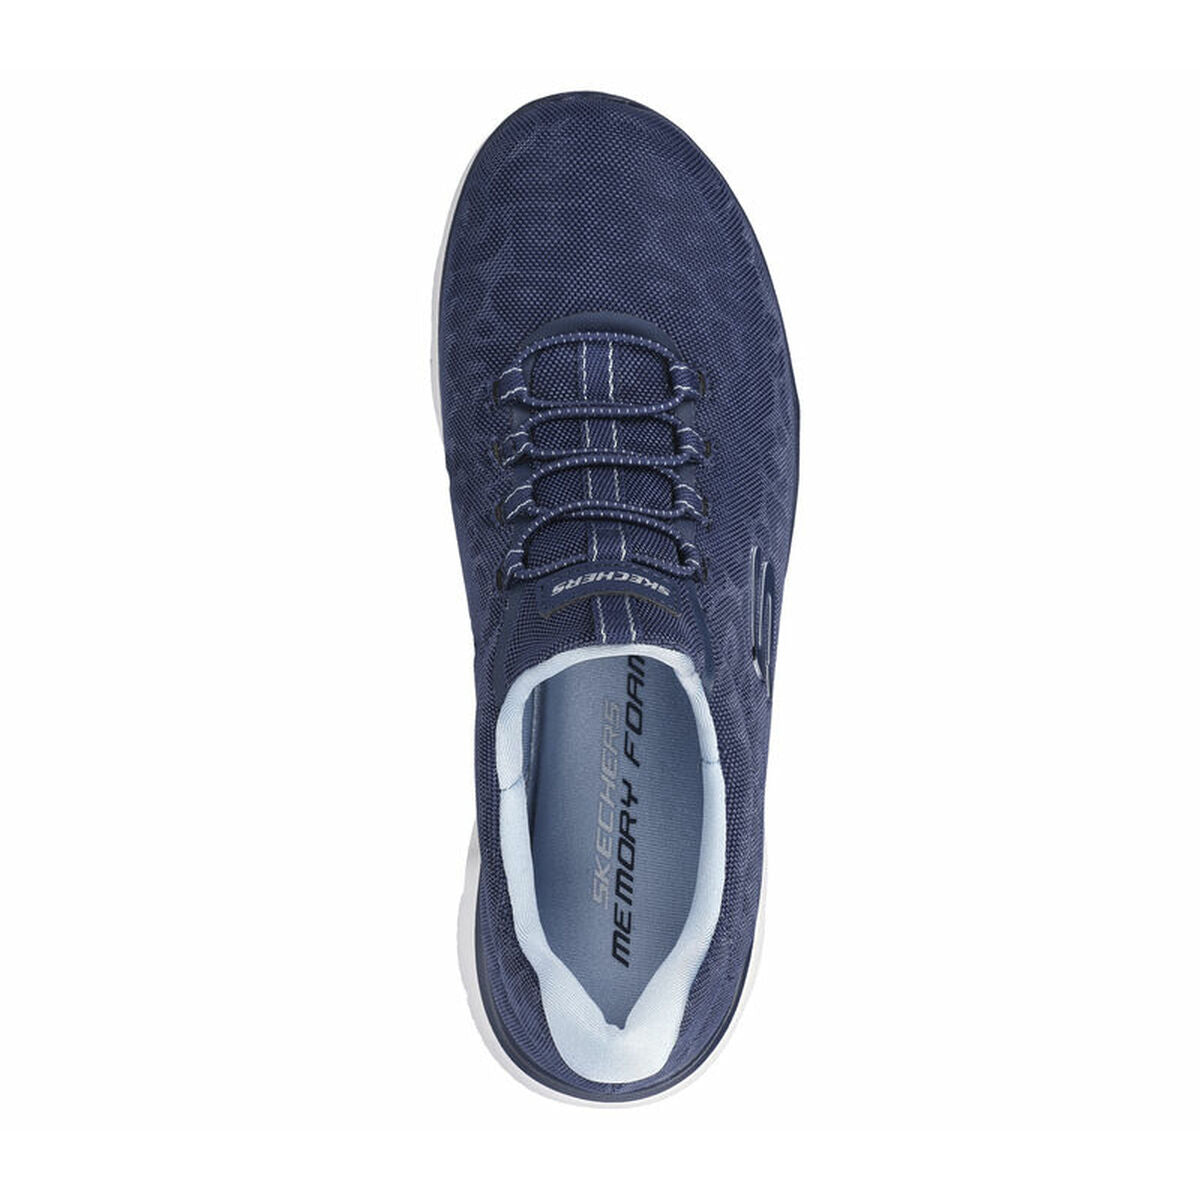 Sports Trainers for Women Skechers SUMMITS SPA 150111 Navy Blue